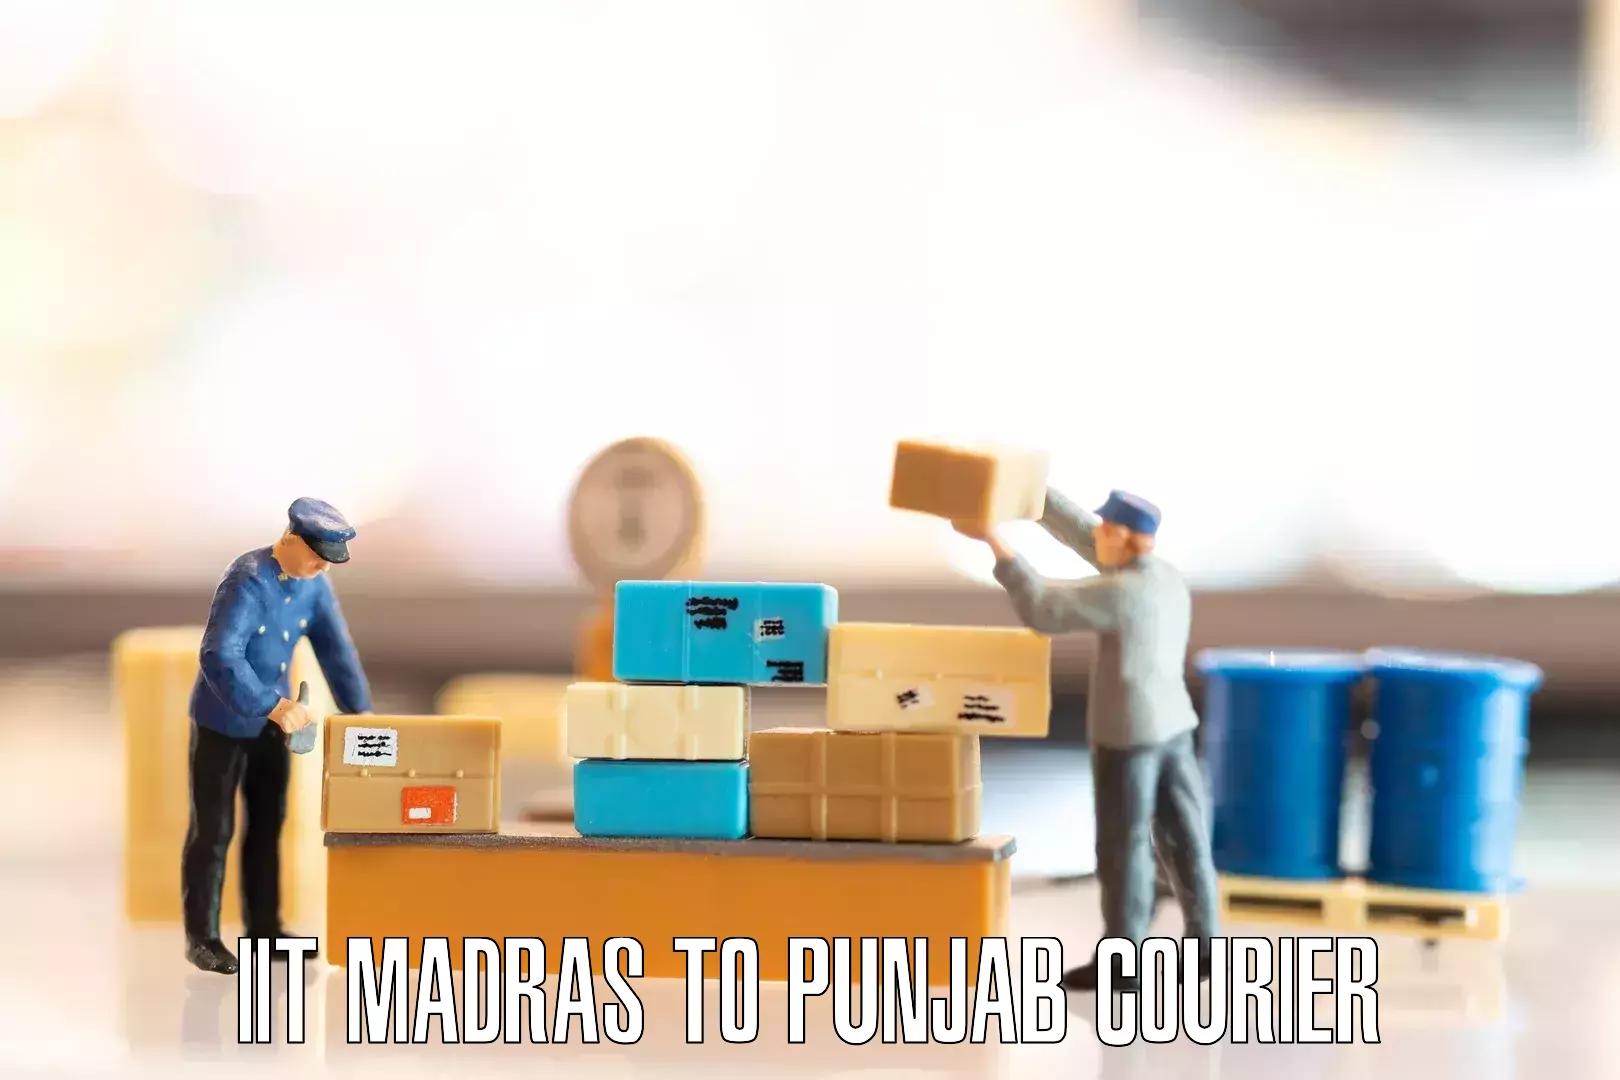 Furniture delivery service in IIT Madras to Punjab